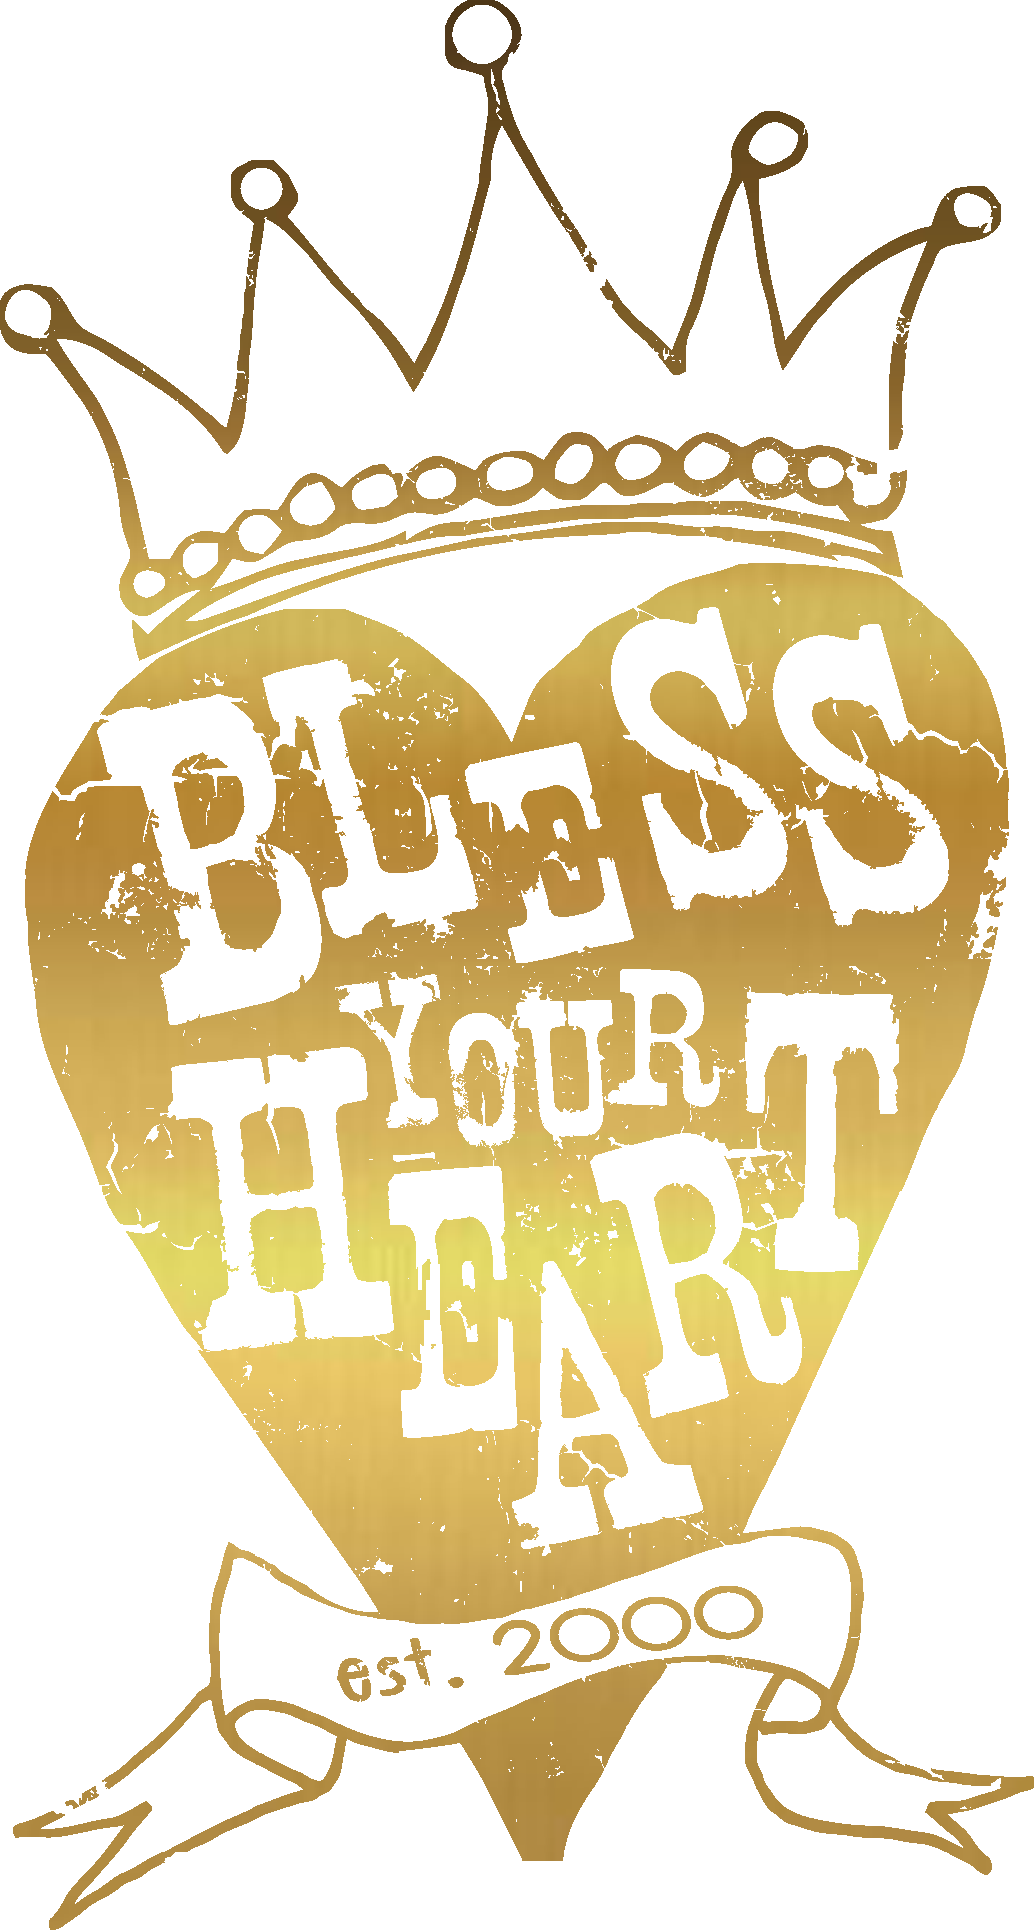 Bump, it up! – Bless Your Heart